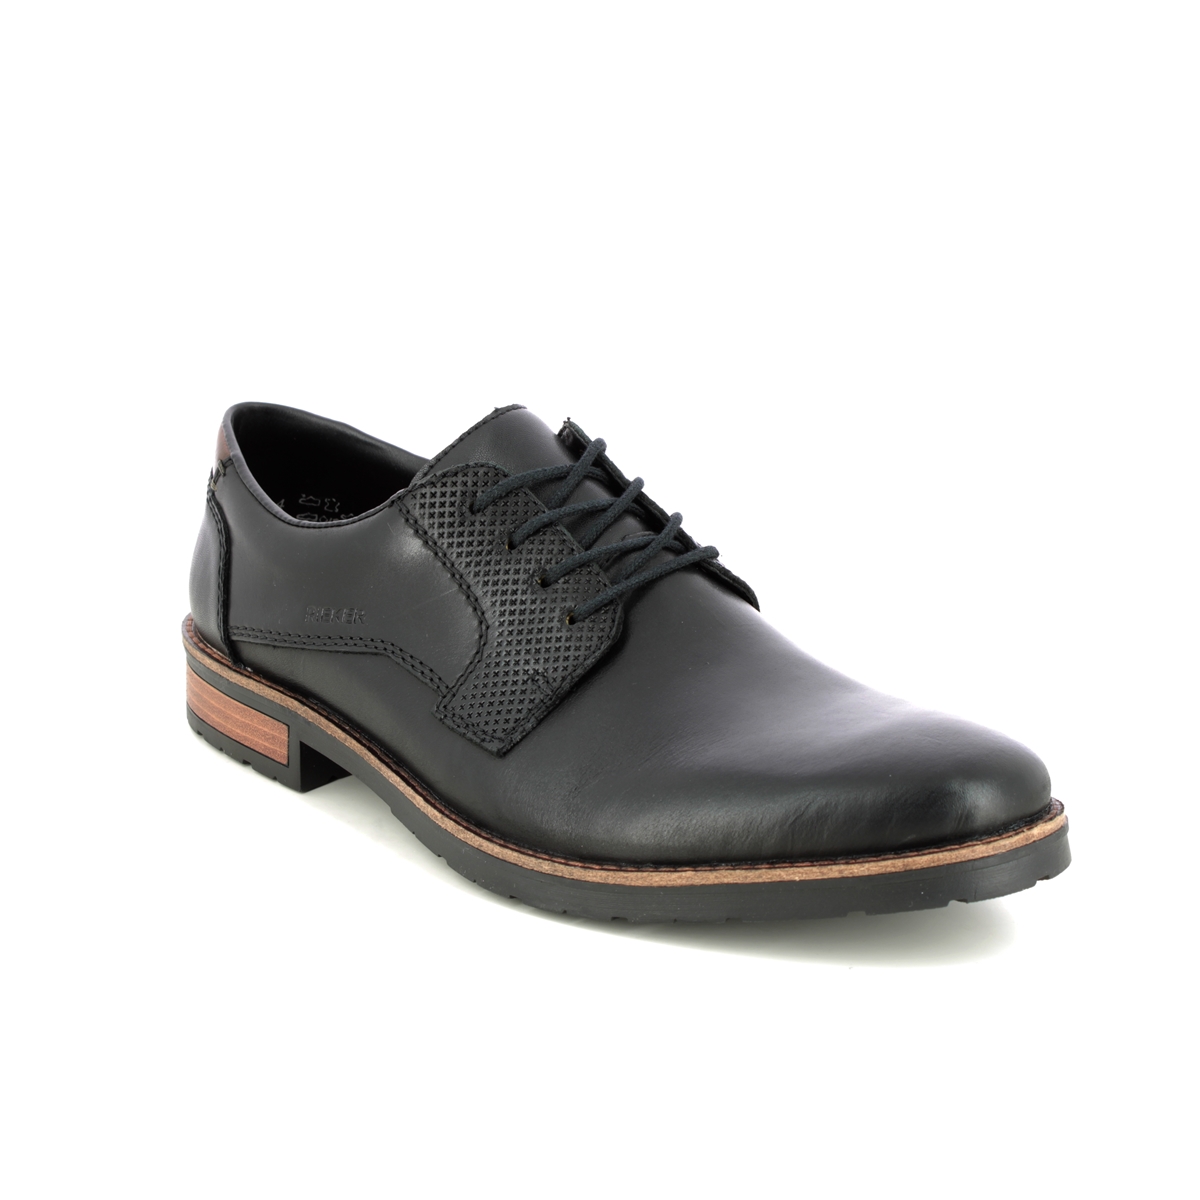 Rieker Claradam Black Leather Mens Formal Shoes 14601-00 In Size 44 In Plain Black Leather